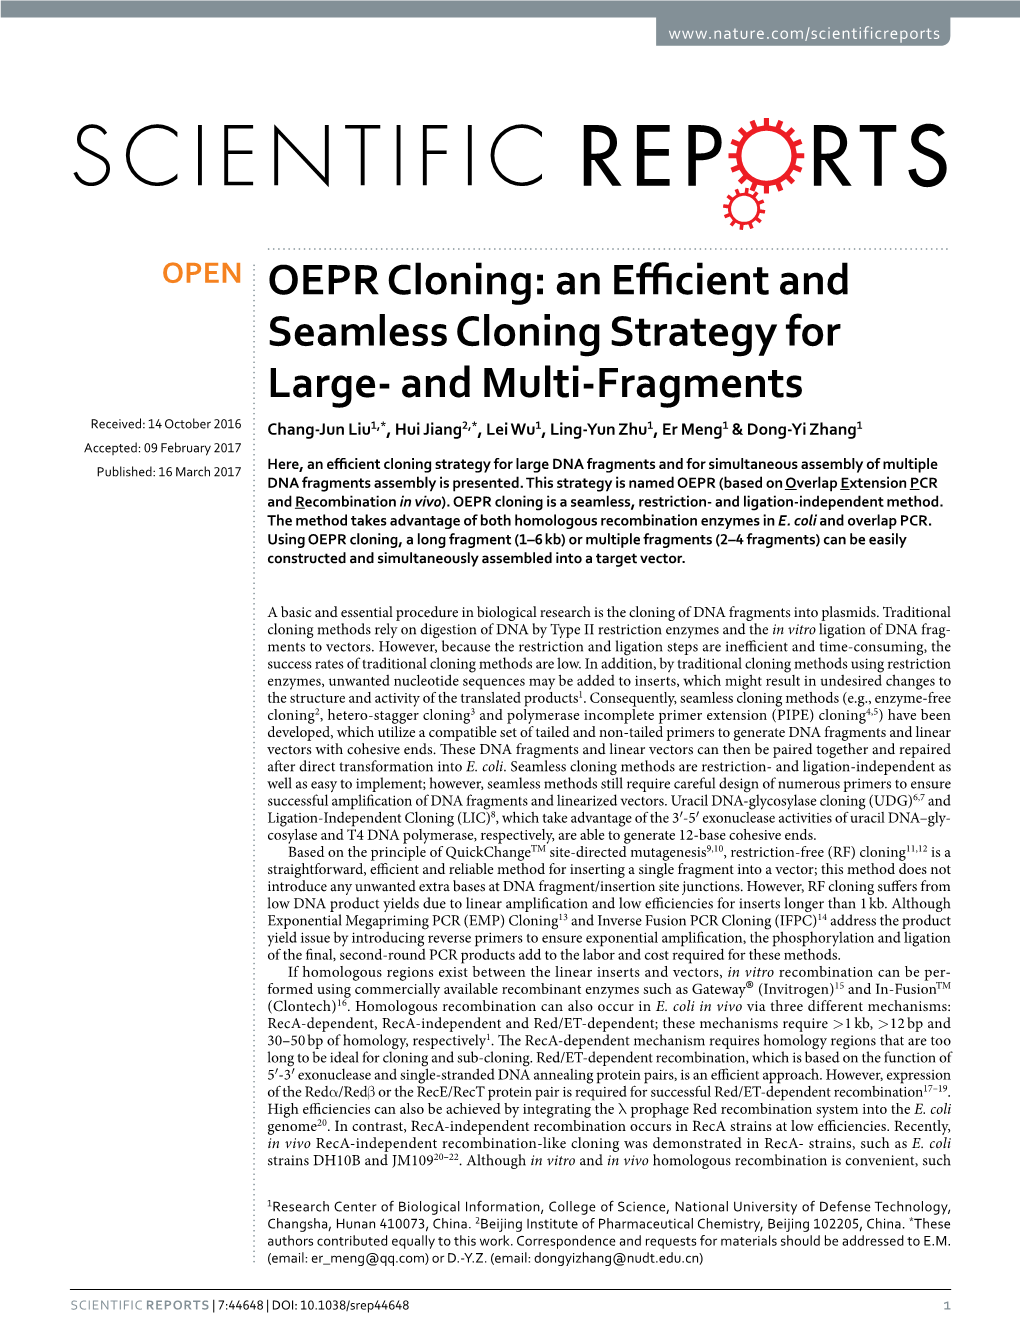 OEPR Cloning: an Efficient and Seamless Cloning Strategy for Large- and Multi-Fragments